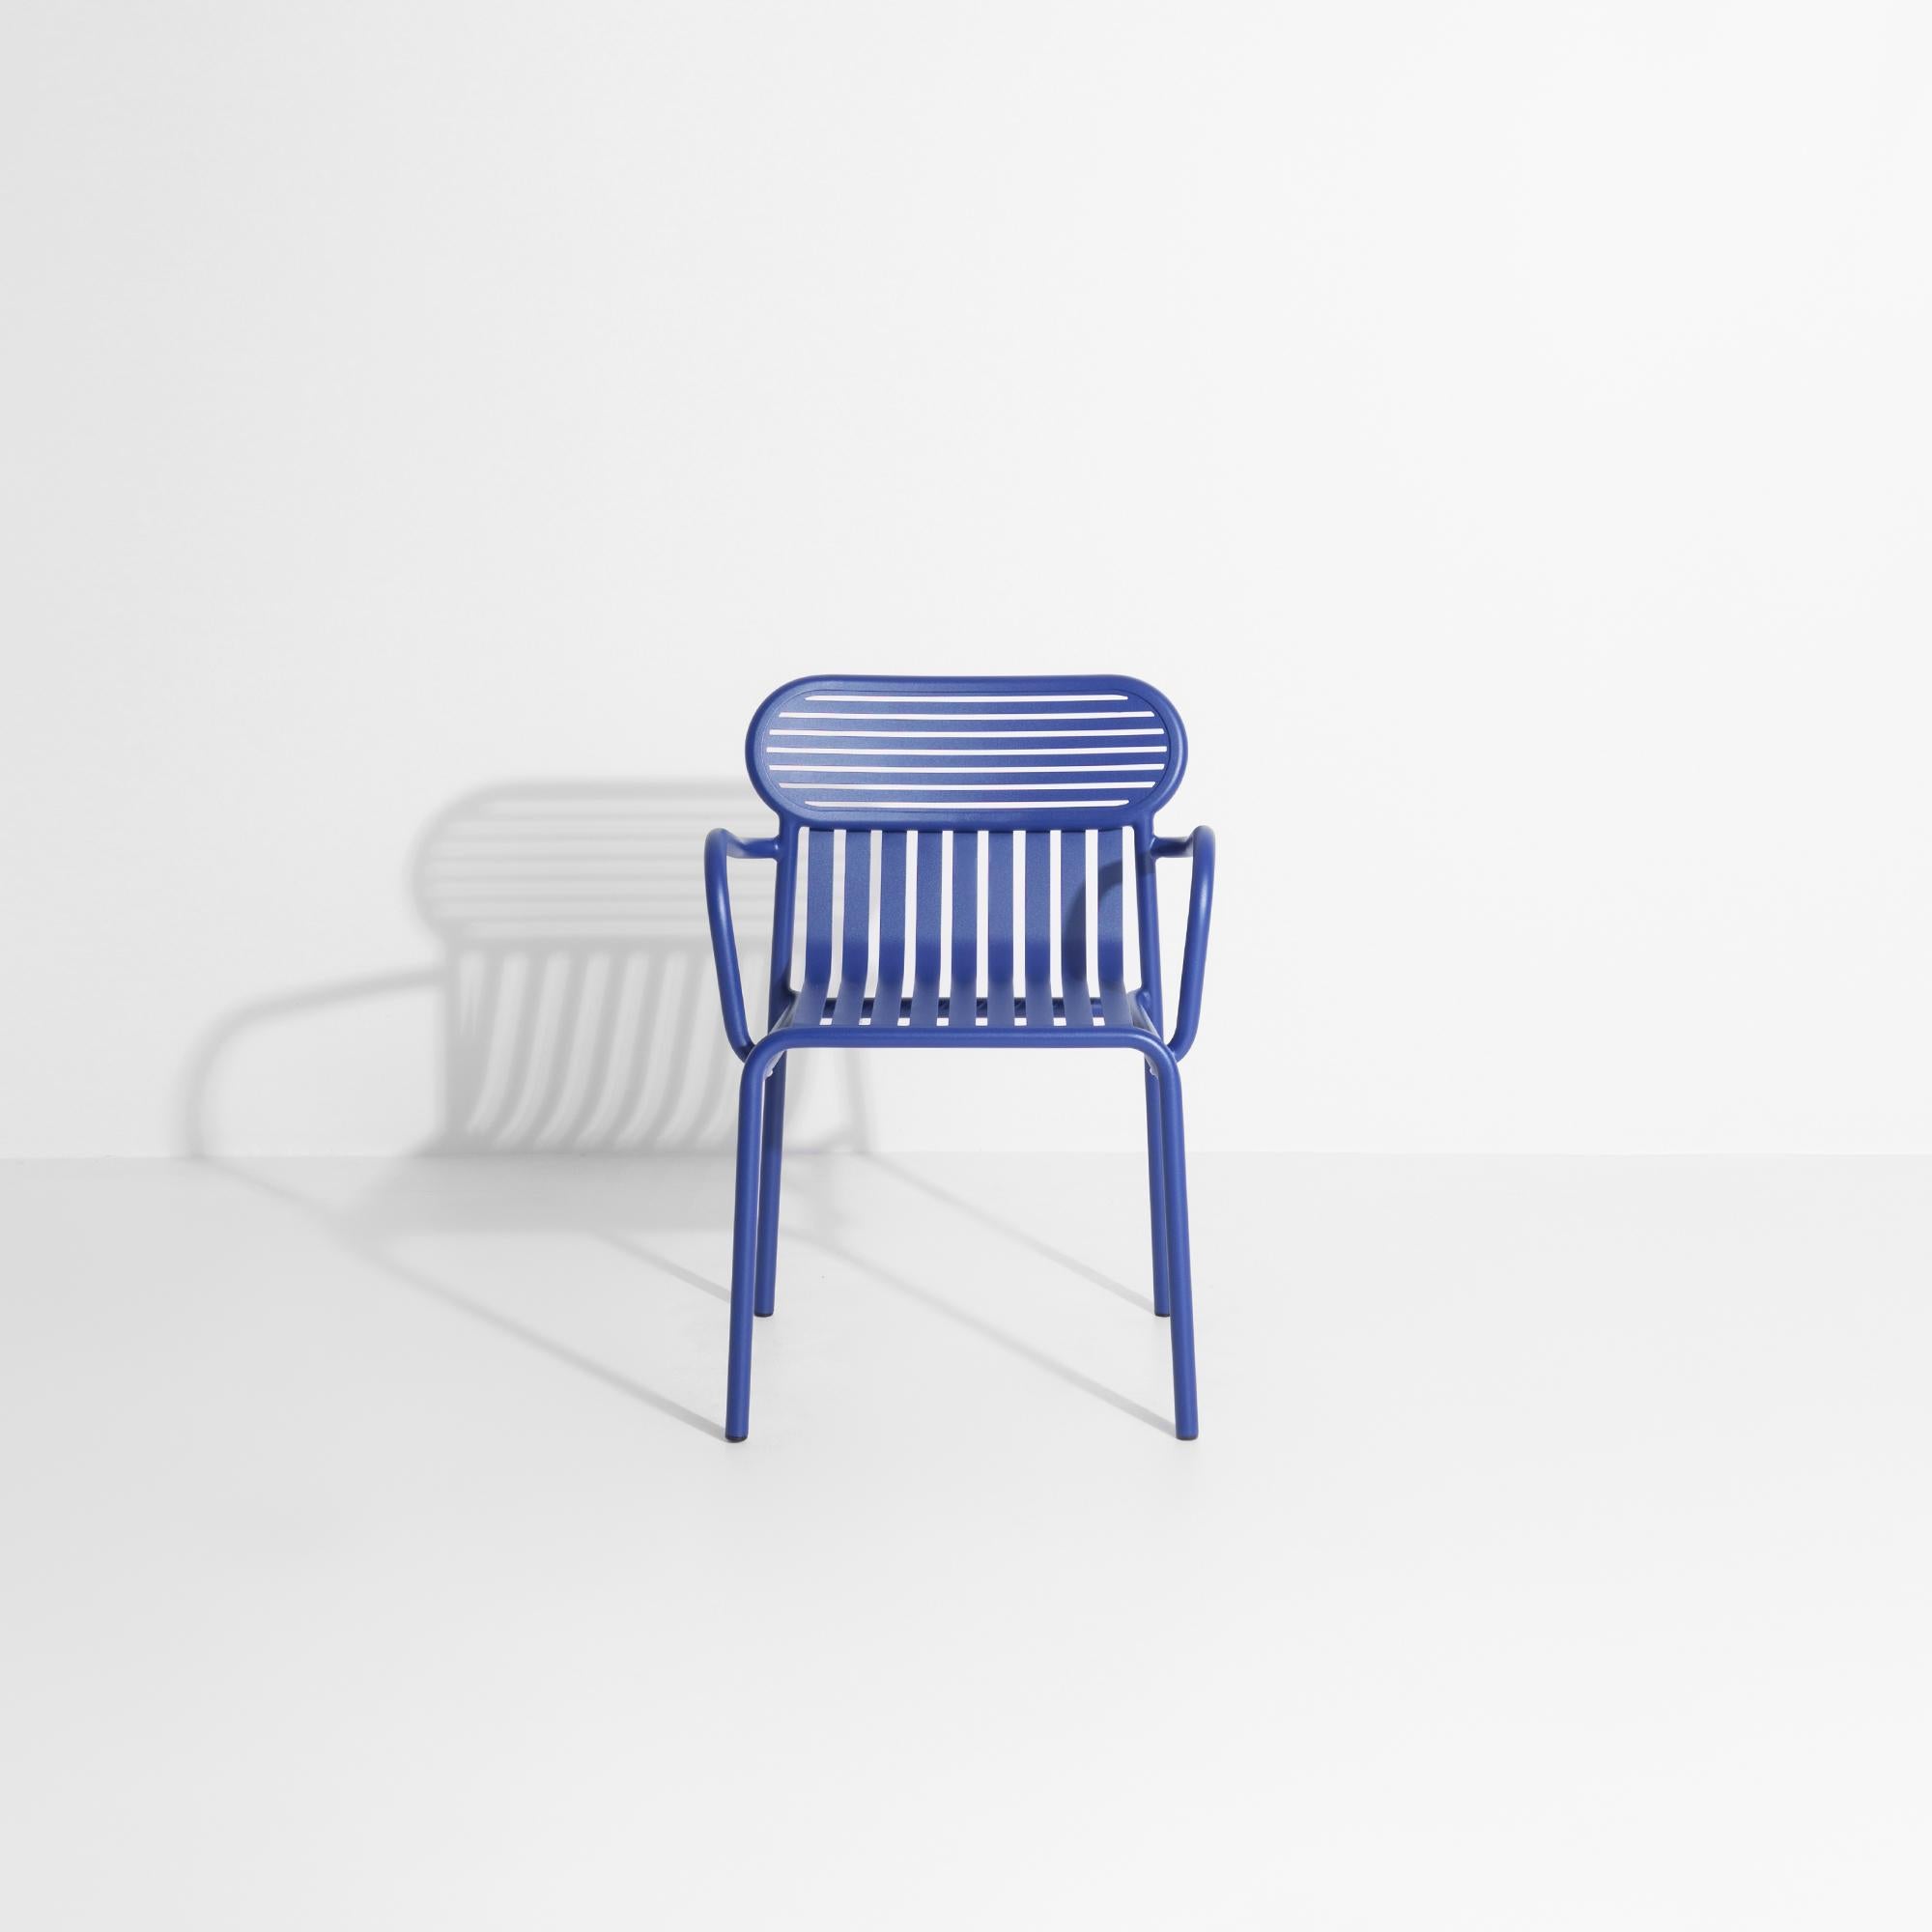 Petite Friture Week-End Bridge Chair in Blue Aluminium by Studio BrichetZiegler In New Condition For Sale In Brooklyn, NY